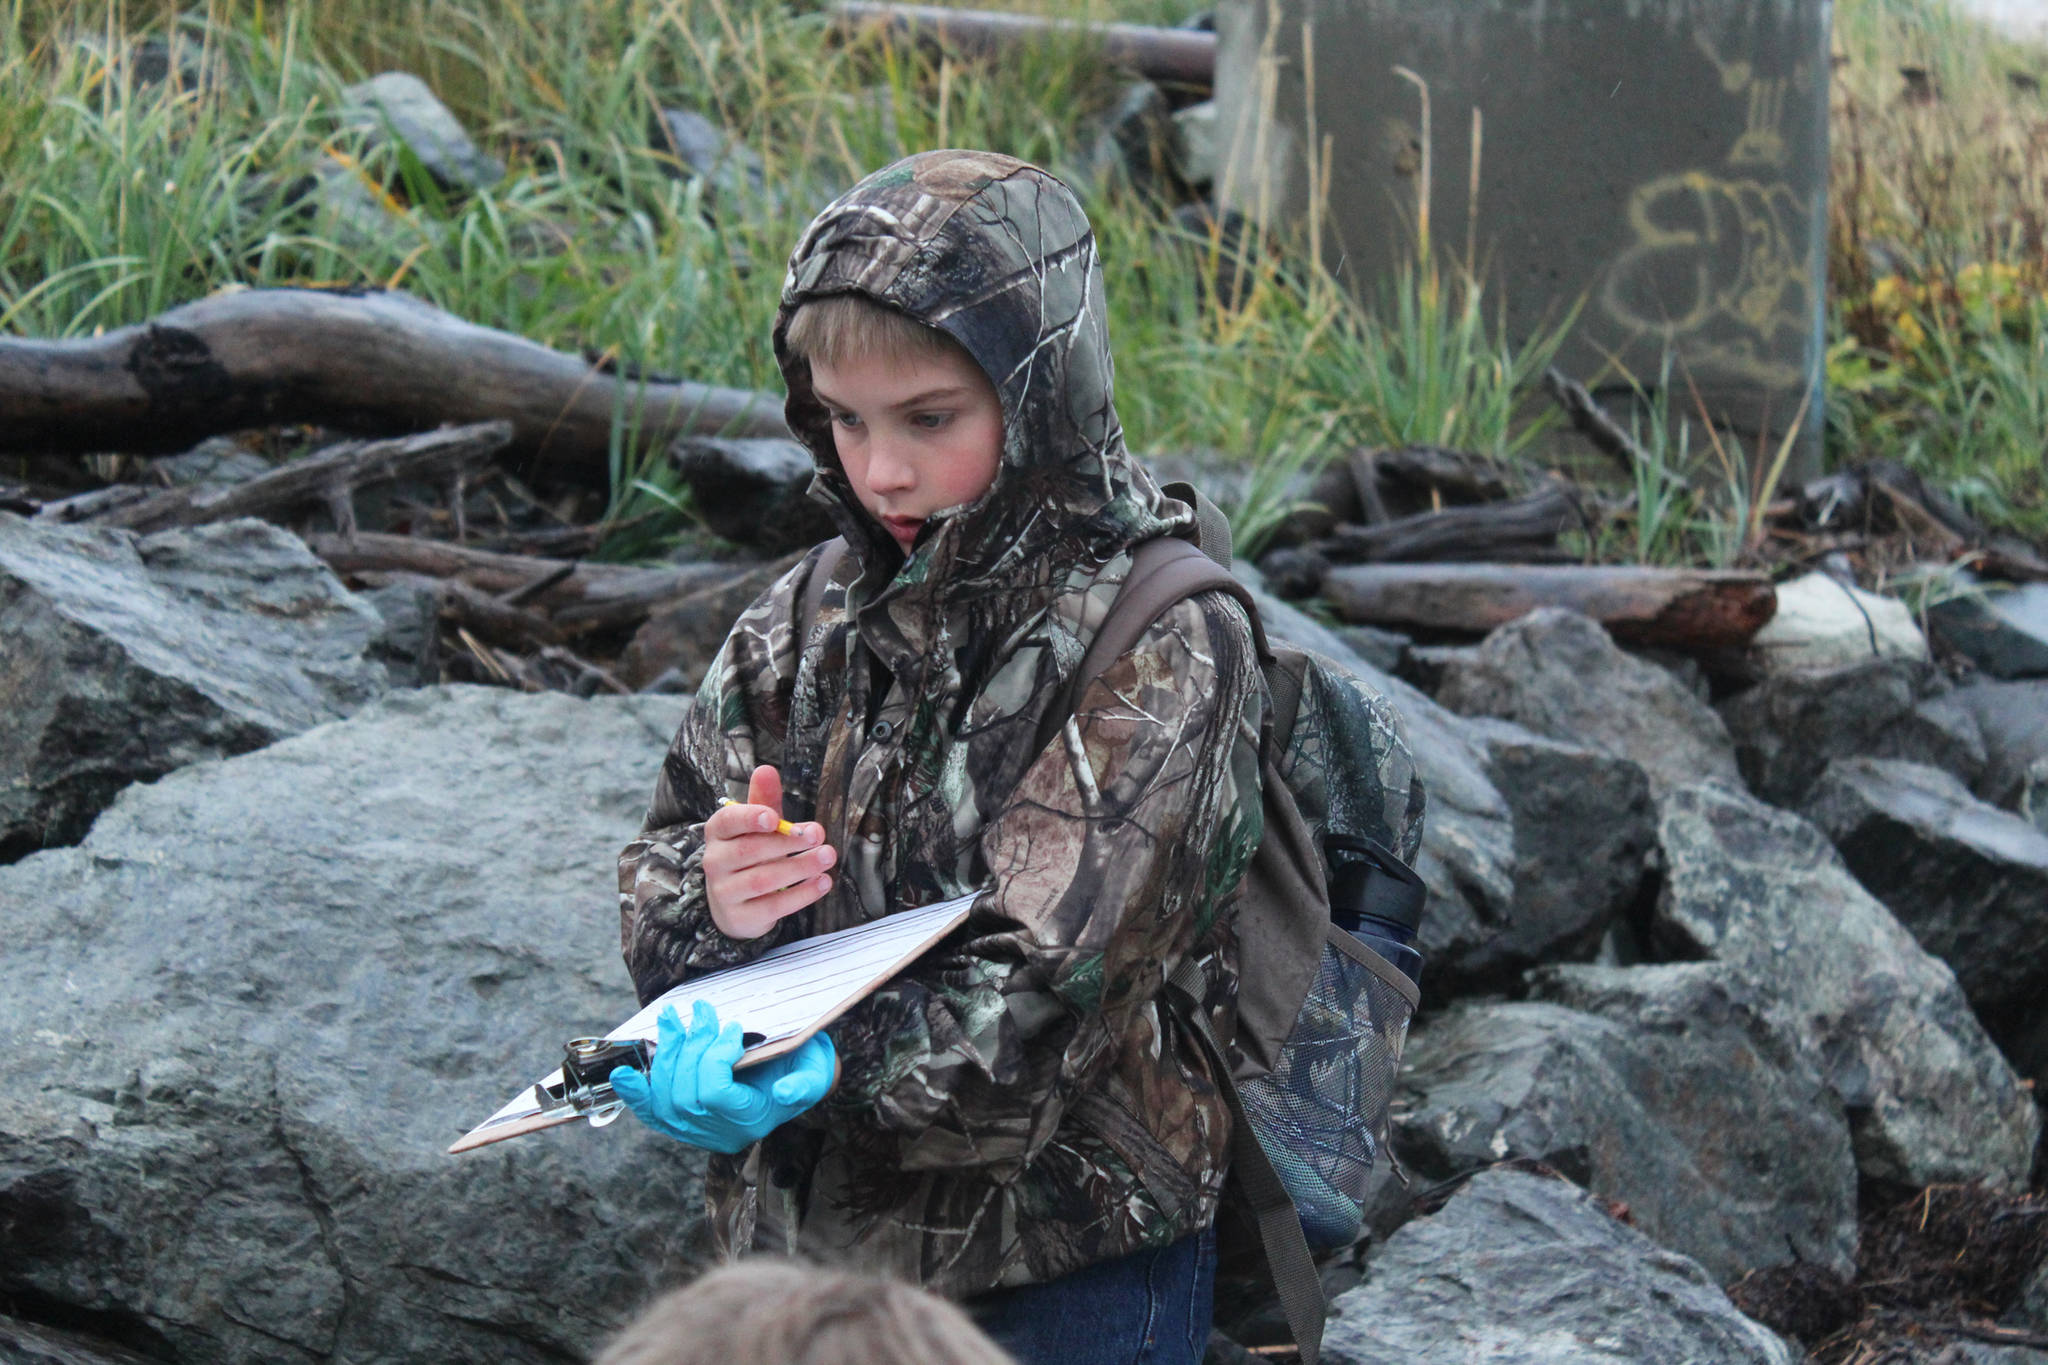 Tanner Johnson, a fourth grader at McNeil Canyon Elementary School, marks down his group’s findings on a clipboard while he and classmates clean the shoreline on Friday, Sept. 22 near Mariner Park in Homer. Many school classes and citizen groups sign up each year to scour a section of coast during the annual Kachemak Bay CoastWalk, hosted by the Center for Alaskan Coastal Studies. (Photo by Megan Pacer/Homer News)